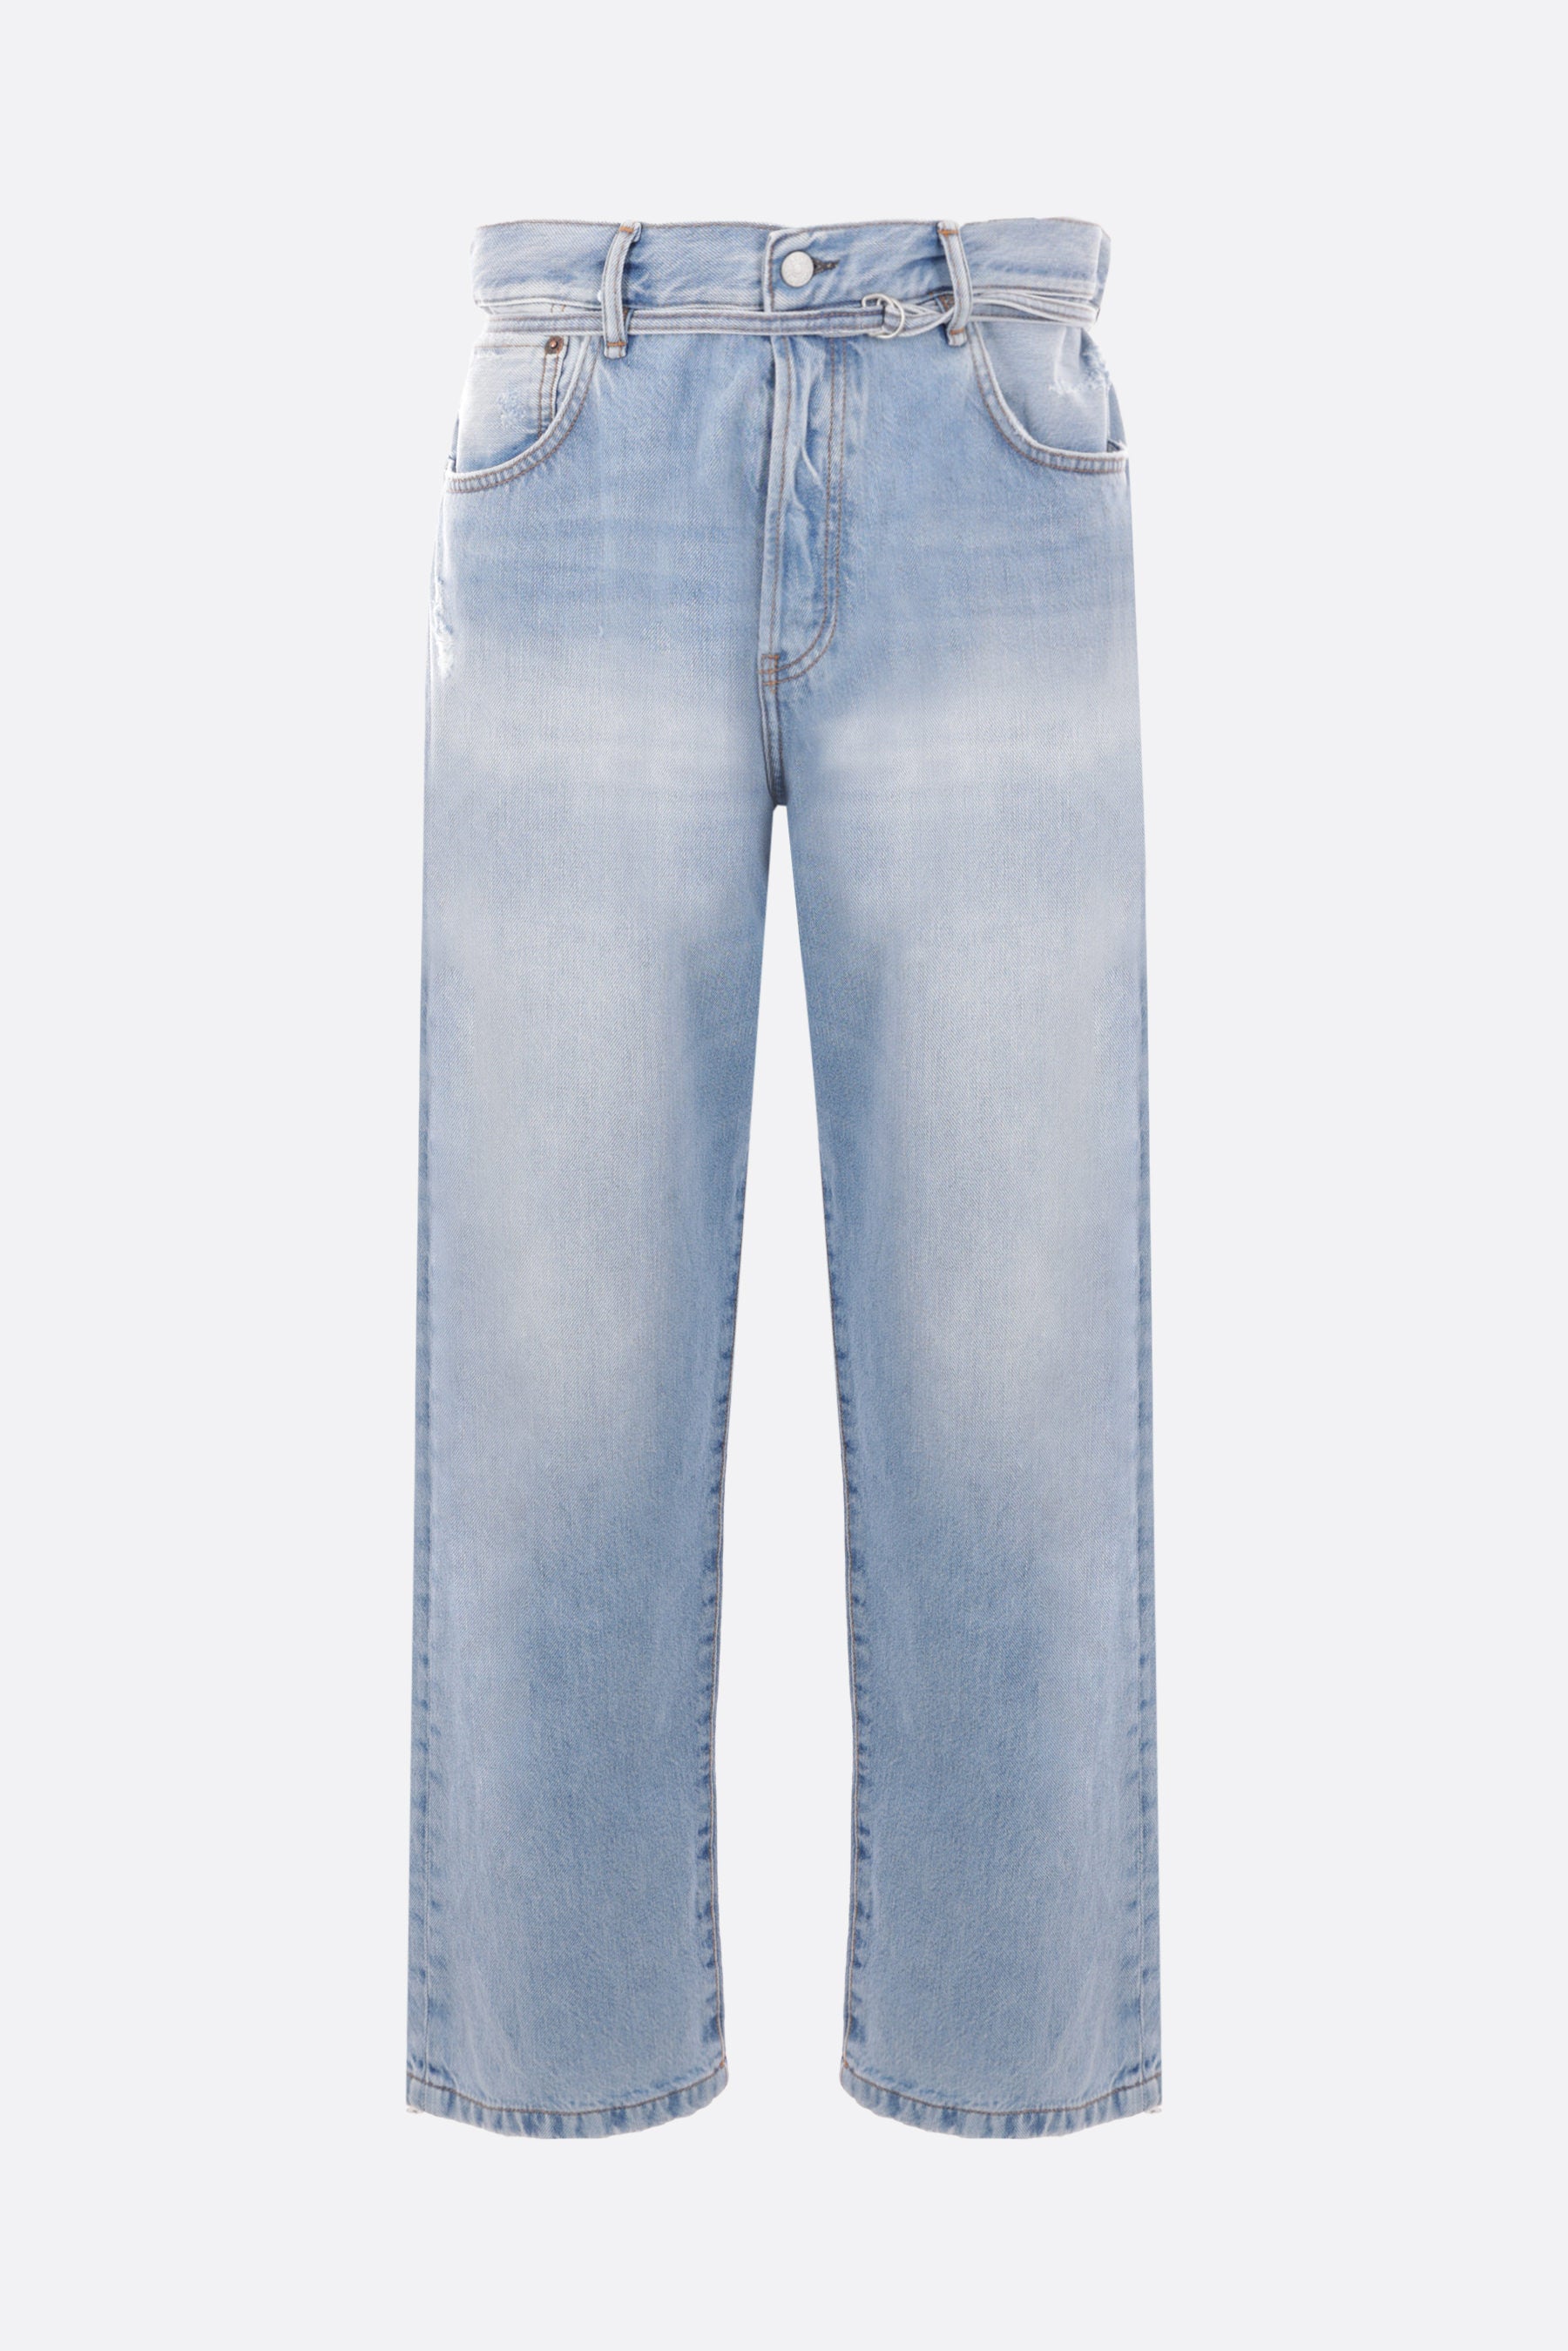 loose-fit denim jeans with thin belt